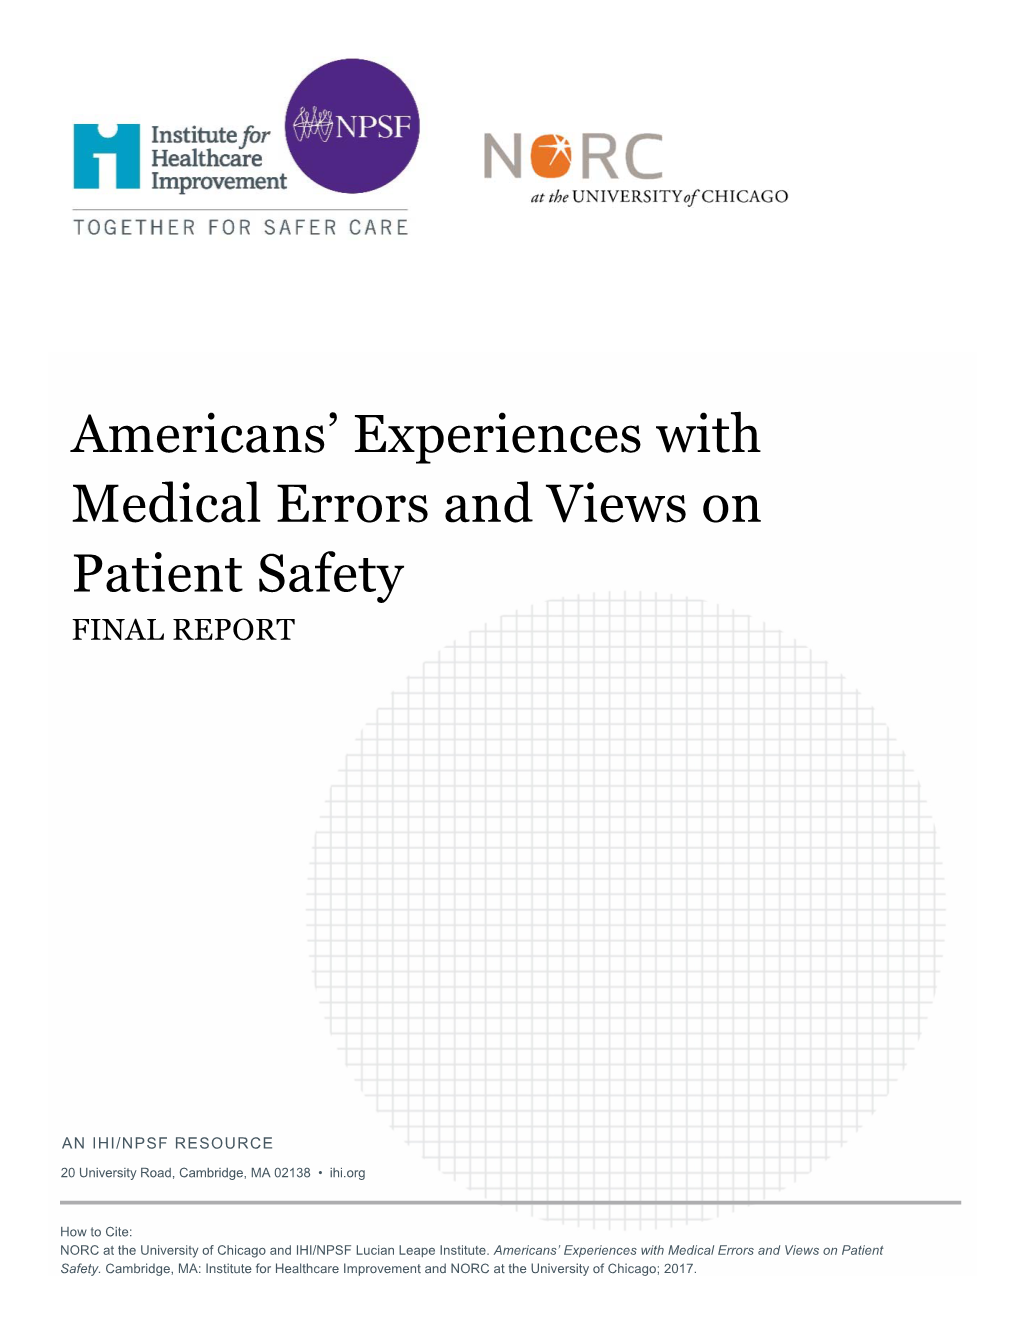 Americans' Experiences with Medical Errors and Views on Patient Safety